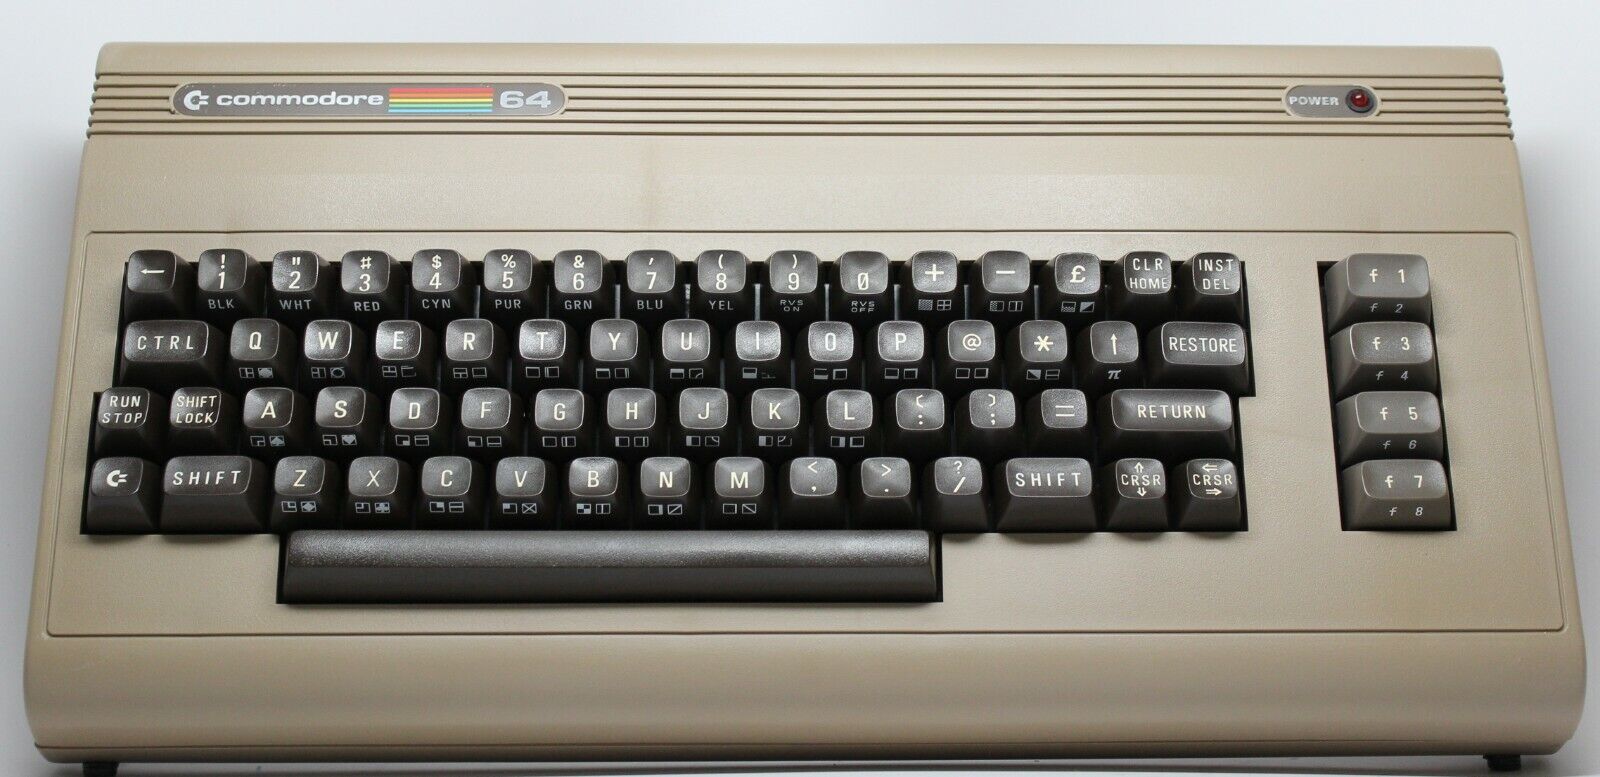 Commodore 64 Computer Restored, Recapped, Fully Tested, Cleaned. Dust Free. NTSC